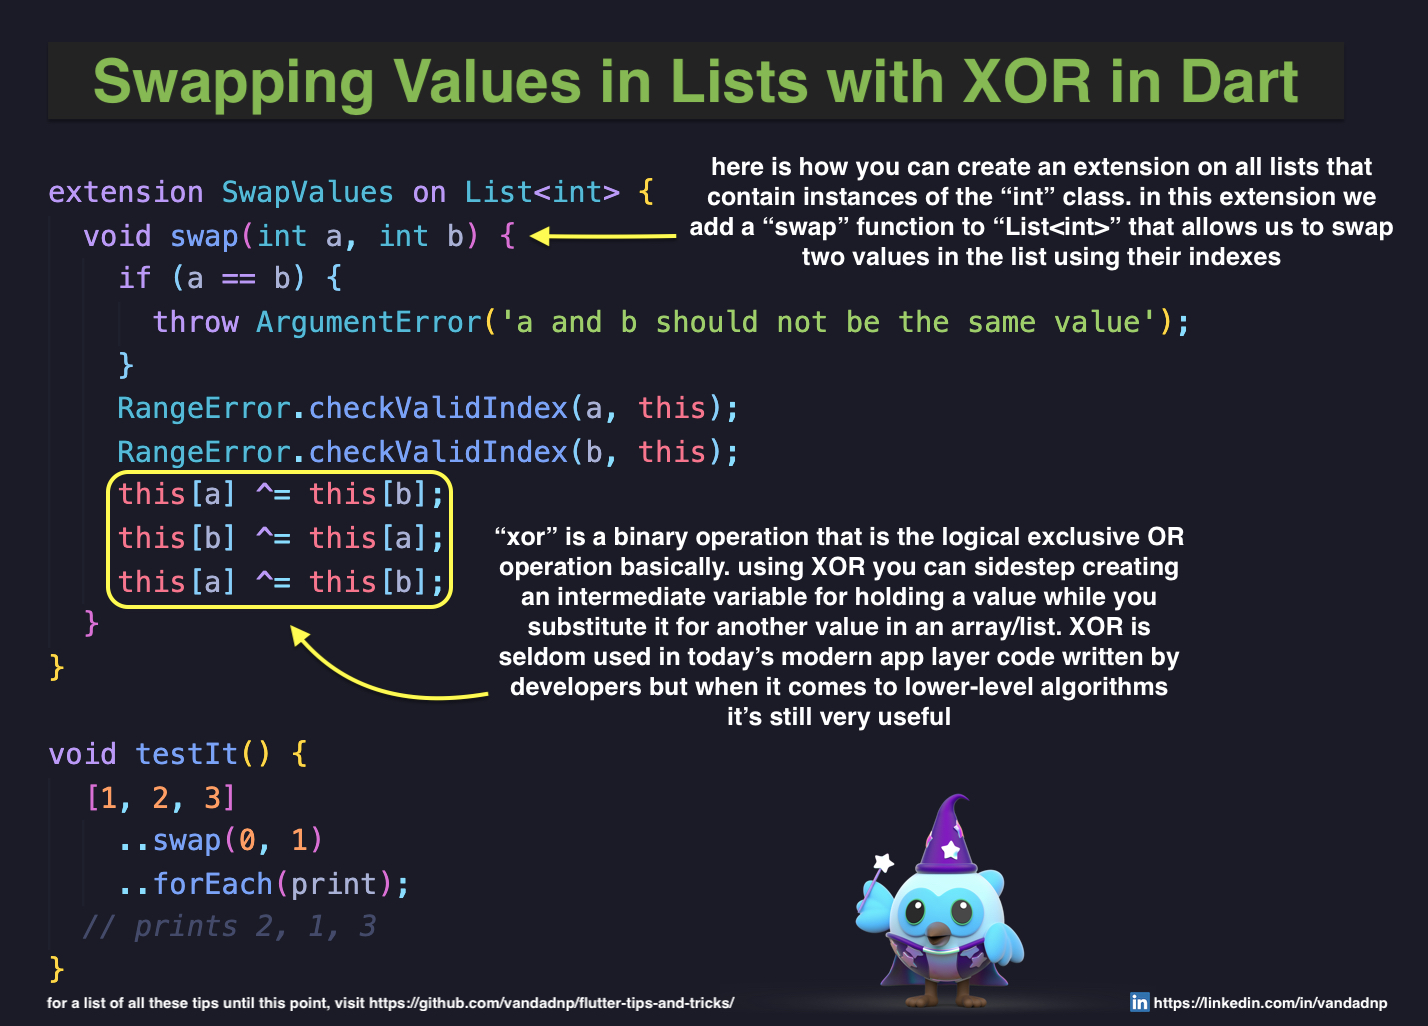 swapping-values-in-lists-with-xor-in-dart.jpg